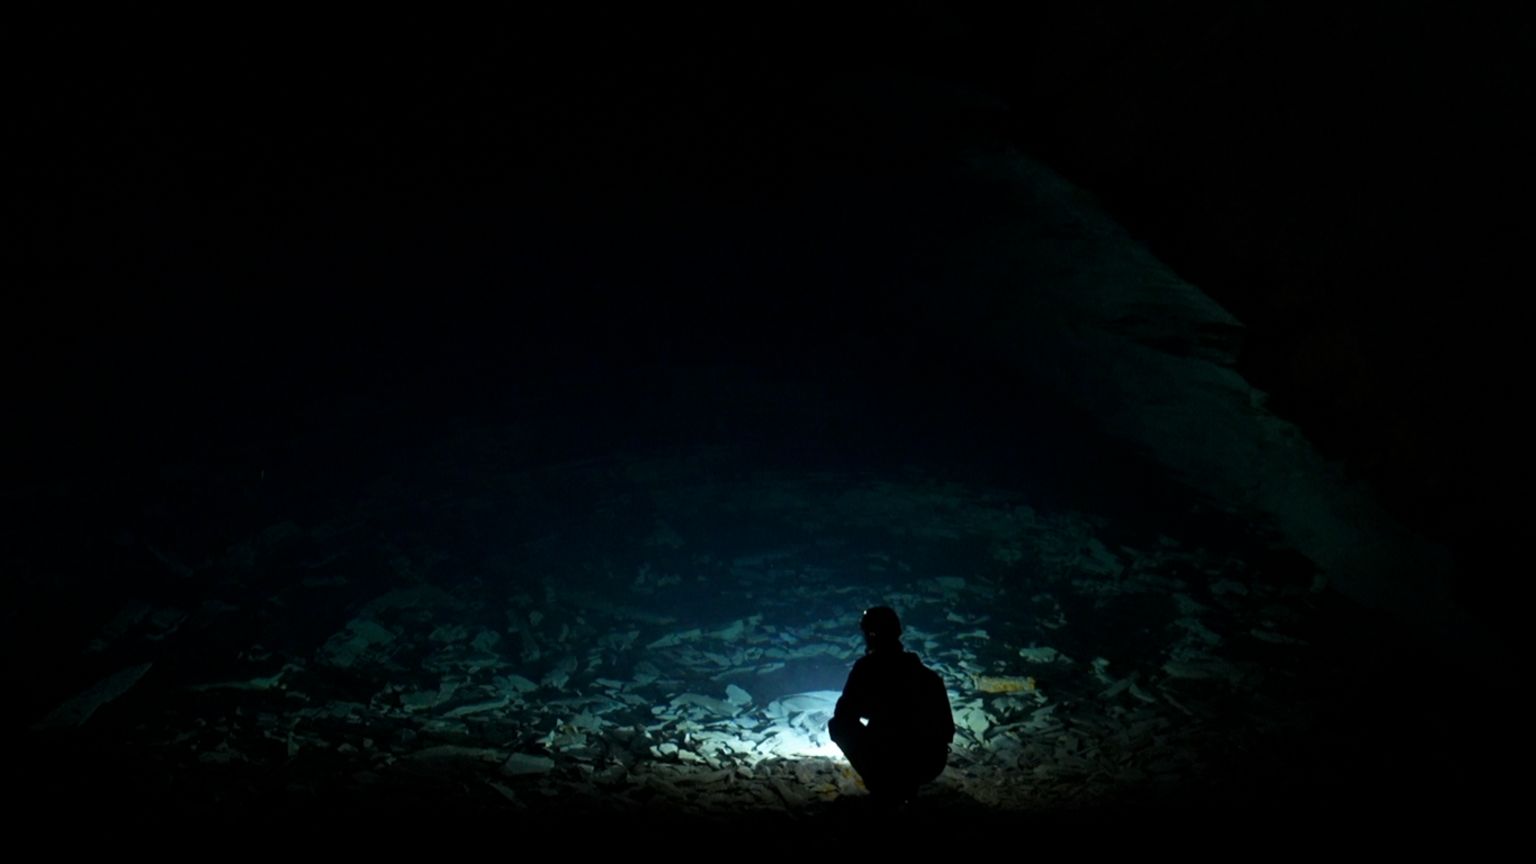 Flooded part of the mine - with member of staff silhouetted against the water in a chamber